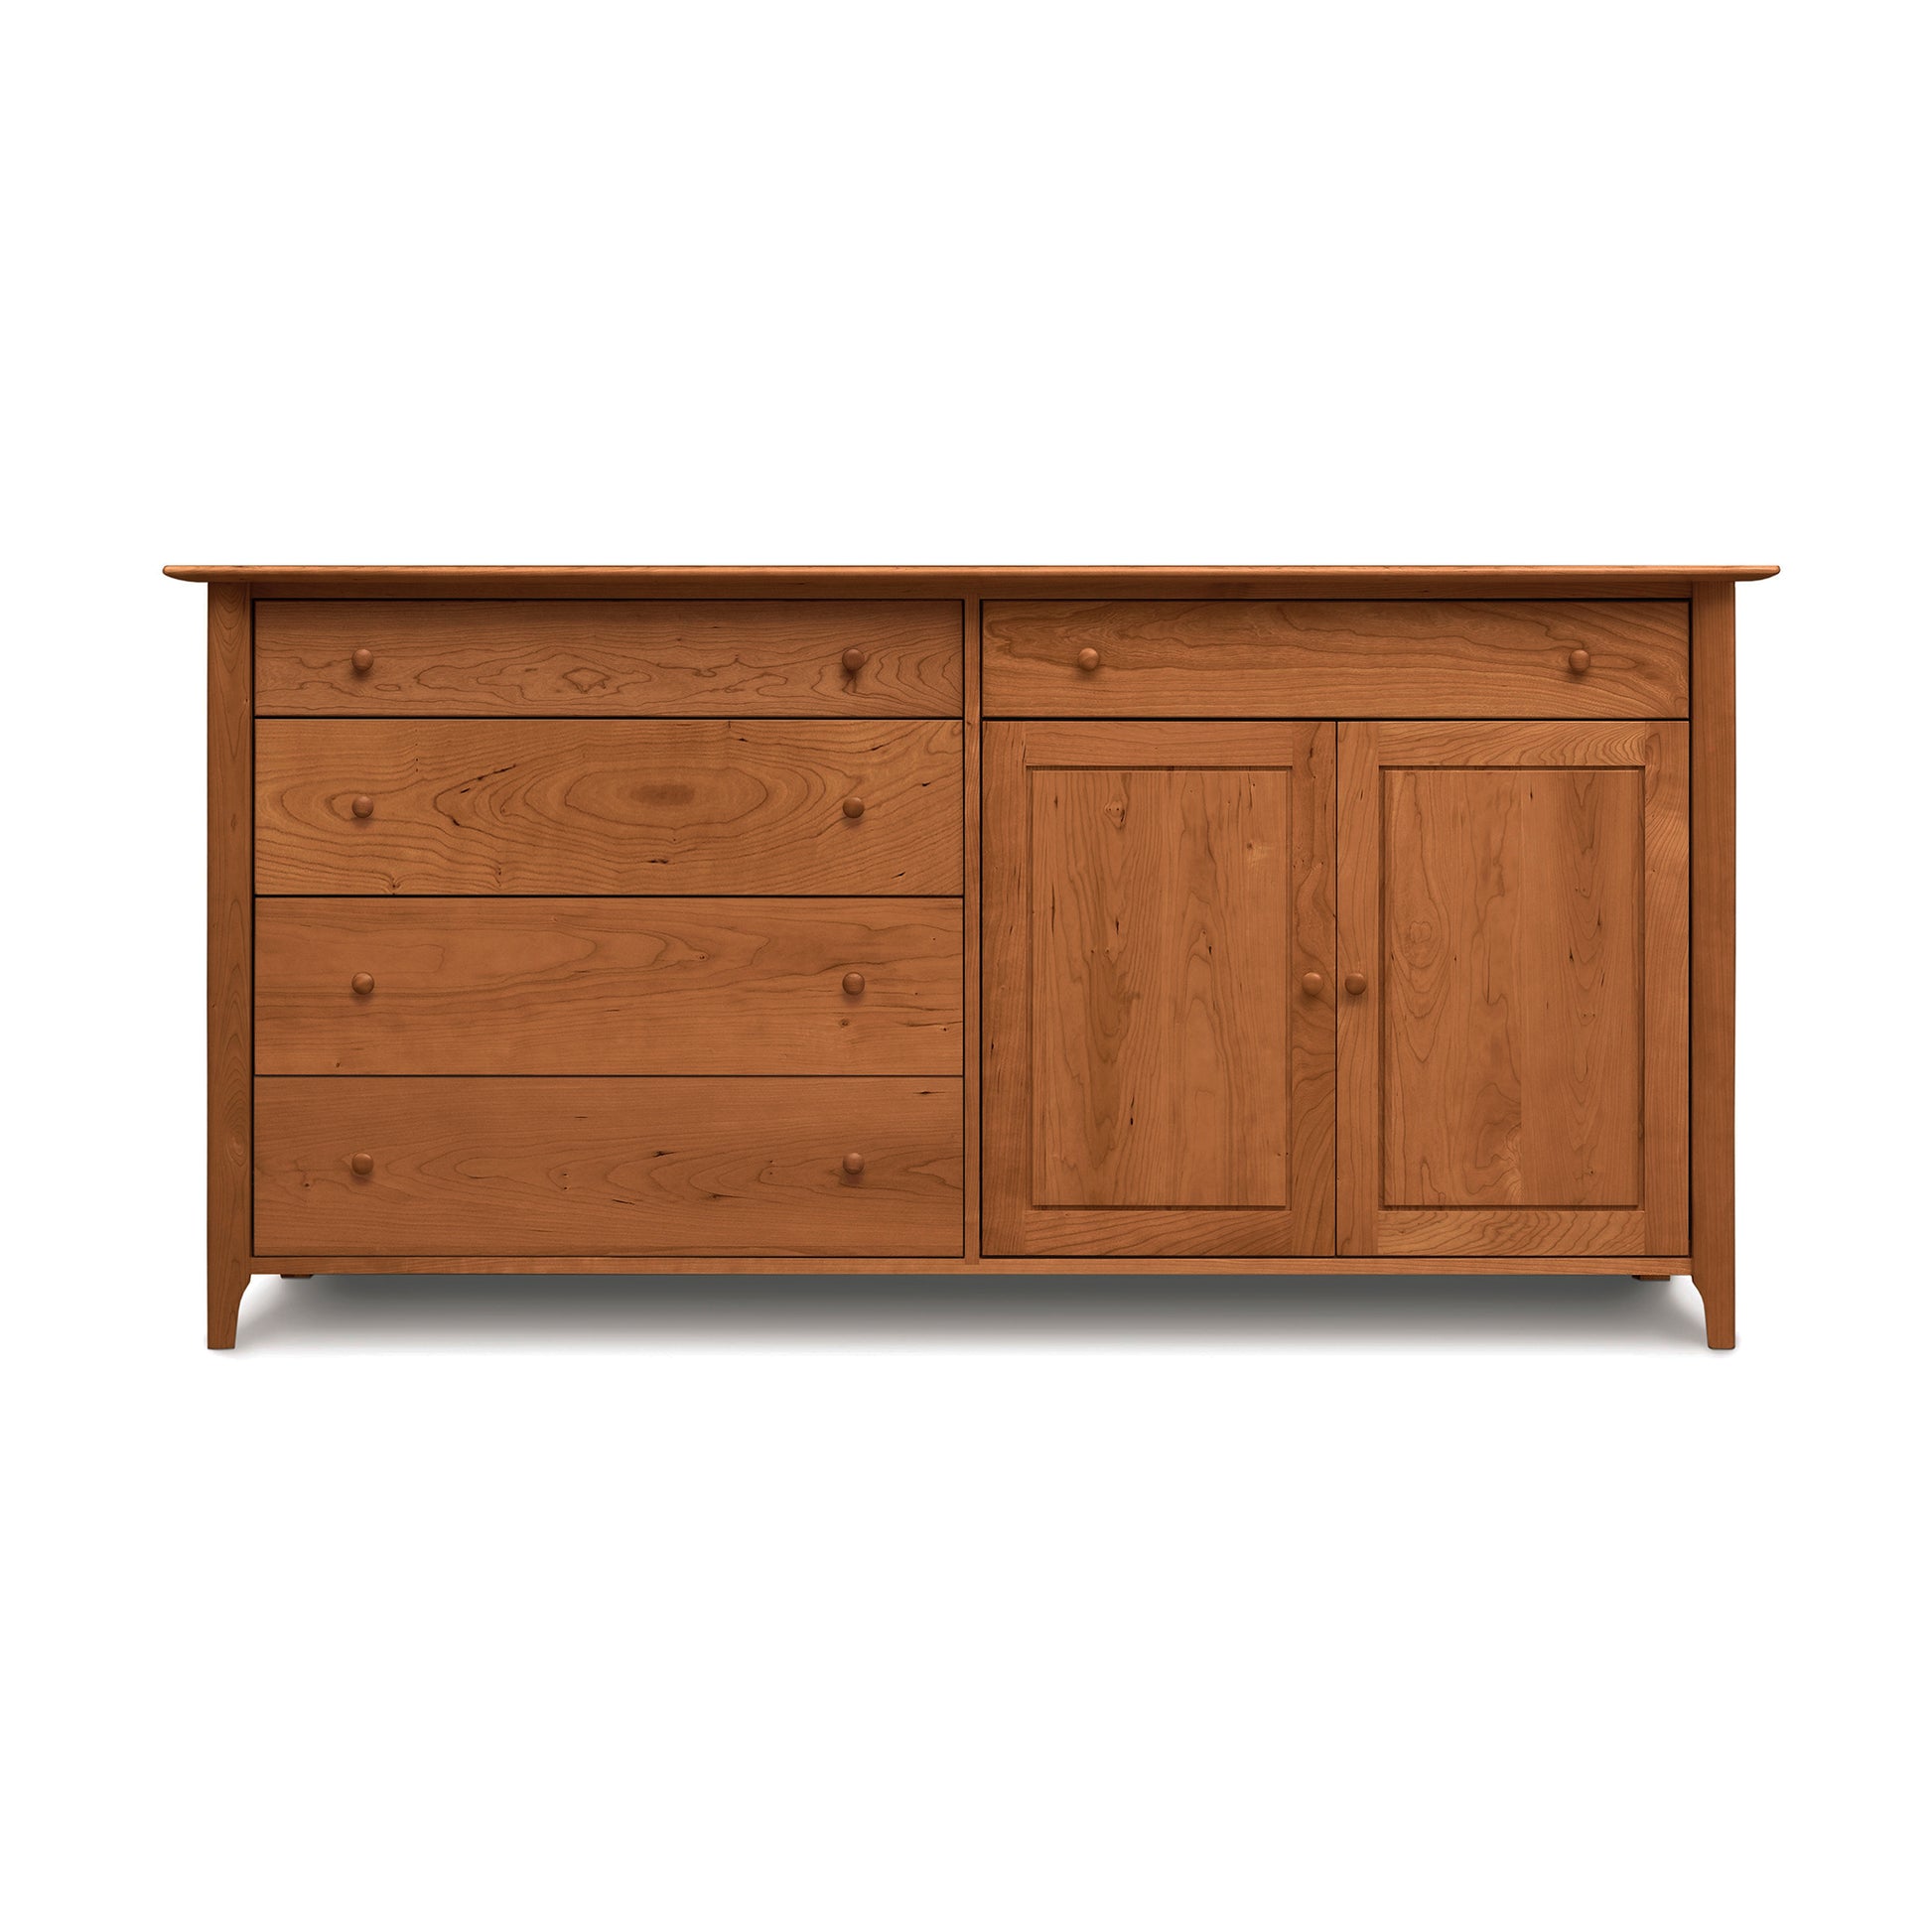 A luxury cherry wood sideboard from the Copeland Furniture Sarah Shaker Collection, with three drawers and two cabinet doors, isolated on a white background.